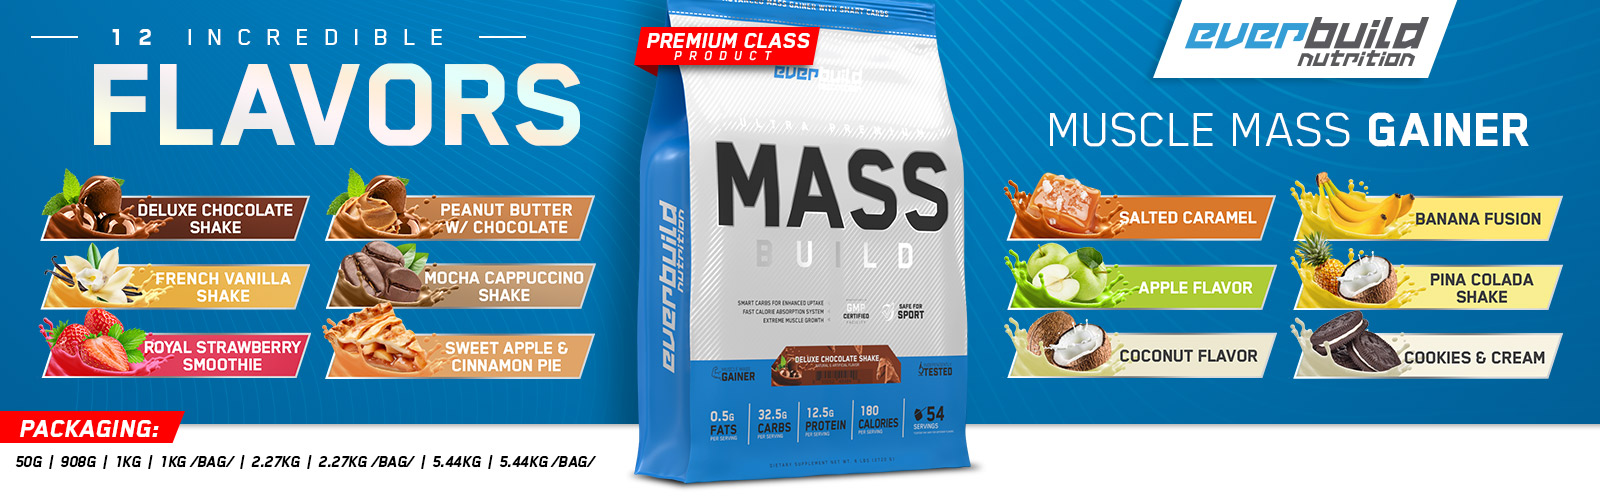 Everbuild Nutrition Mass Build Gainer - Food supplement for gaining weight and increasing muscle mass.